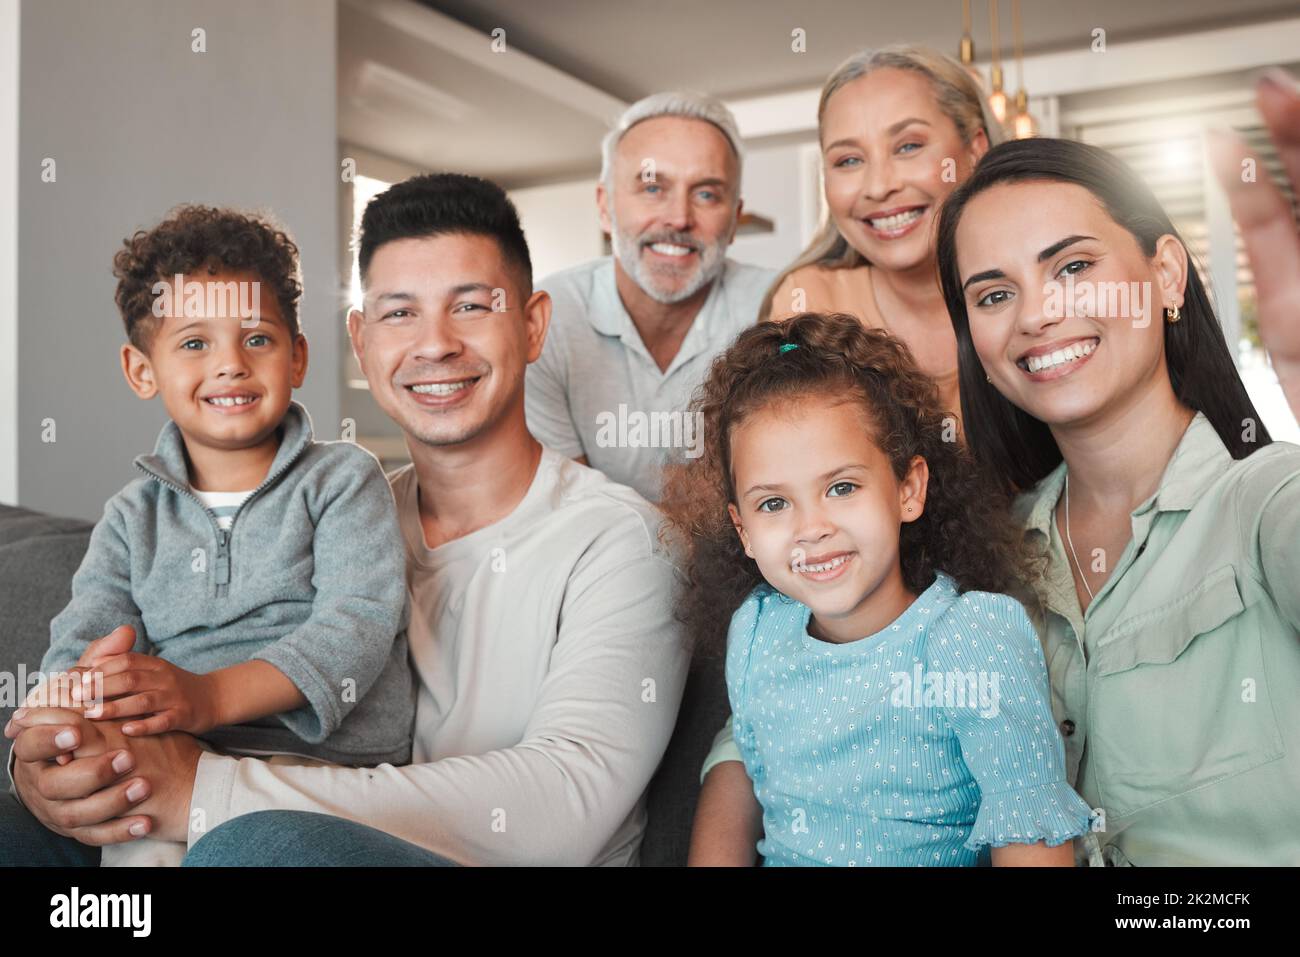 A picture perfect family. Shot of a family taking a selfie together at home. Stock Photo